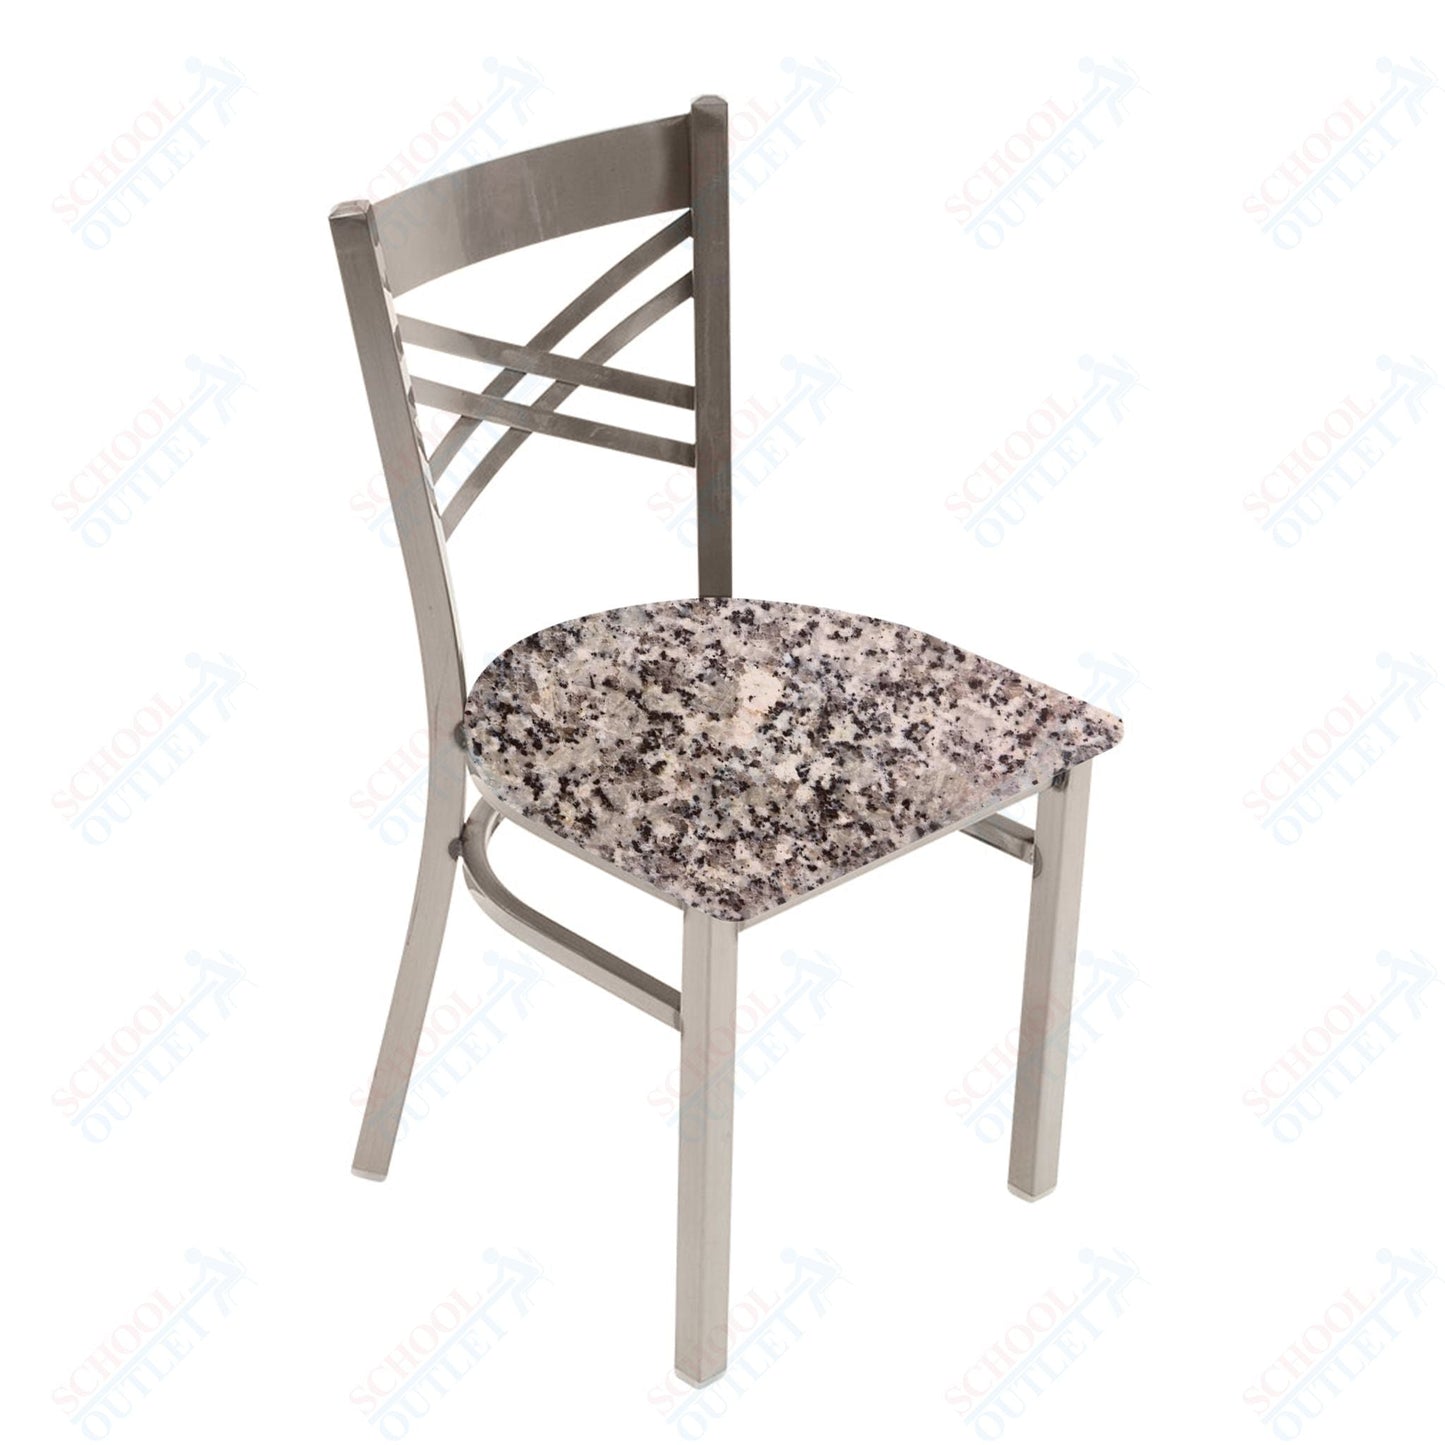 AmTab Cafe Chair - 16.5"W x 17"L x 32.25"H - Seat Height 17.25"H (AMT - CAFECHAIR - 1) - SchoolOutlet